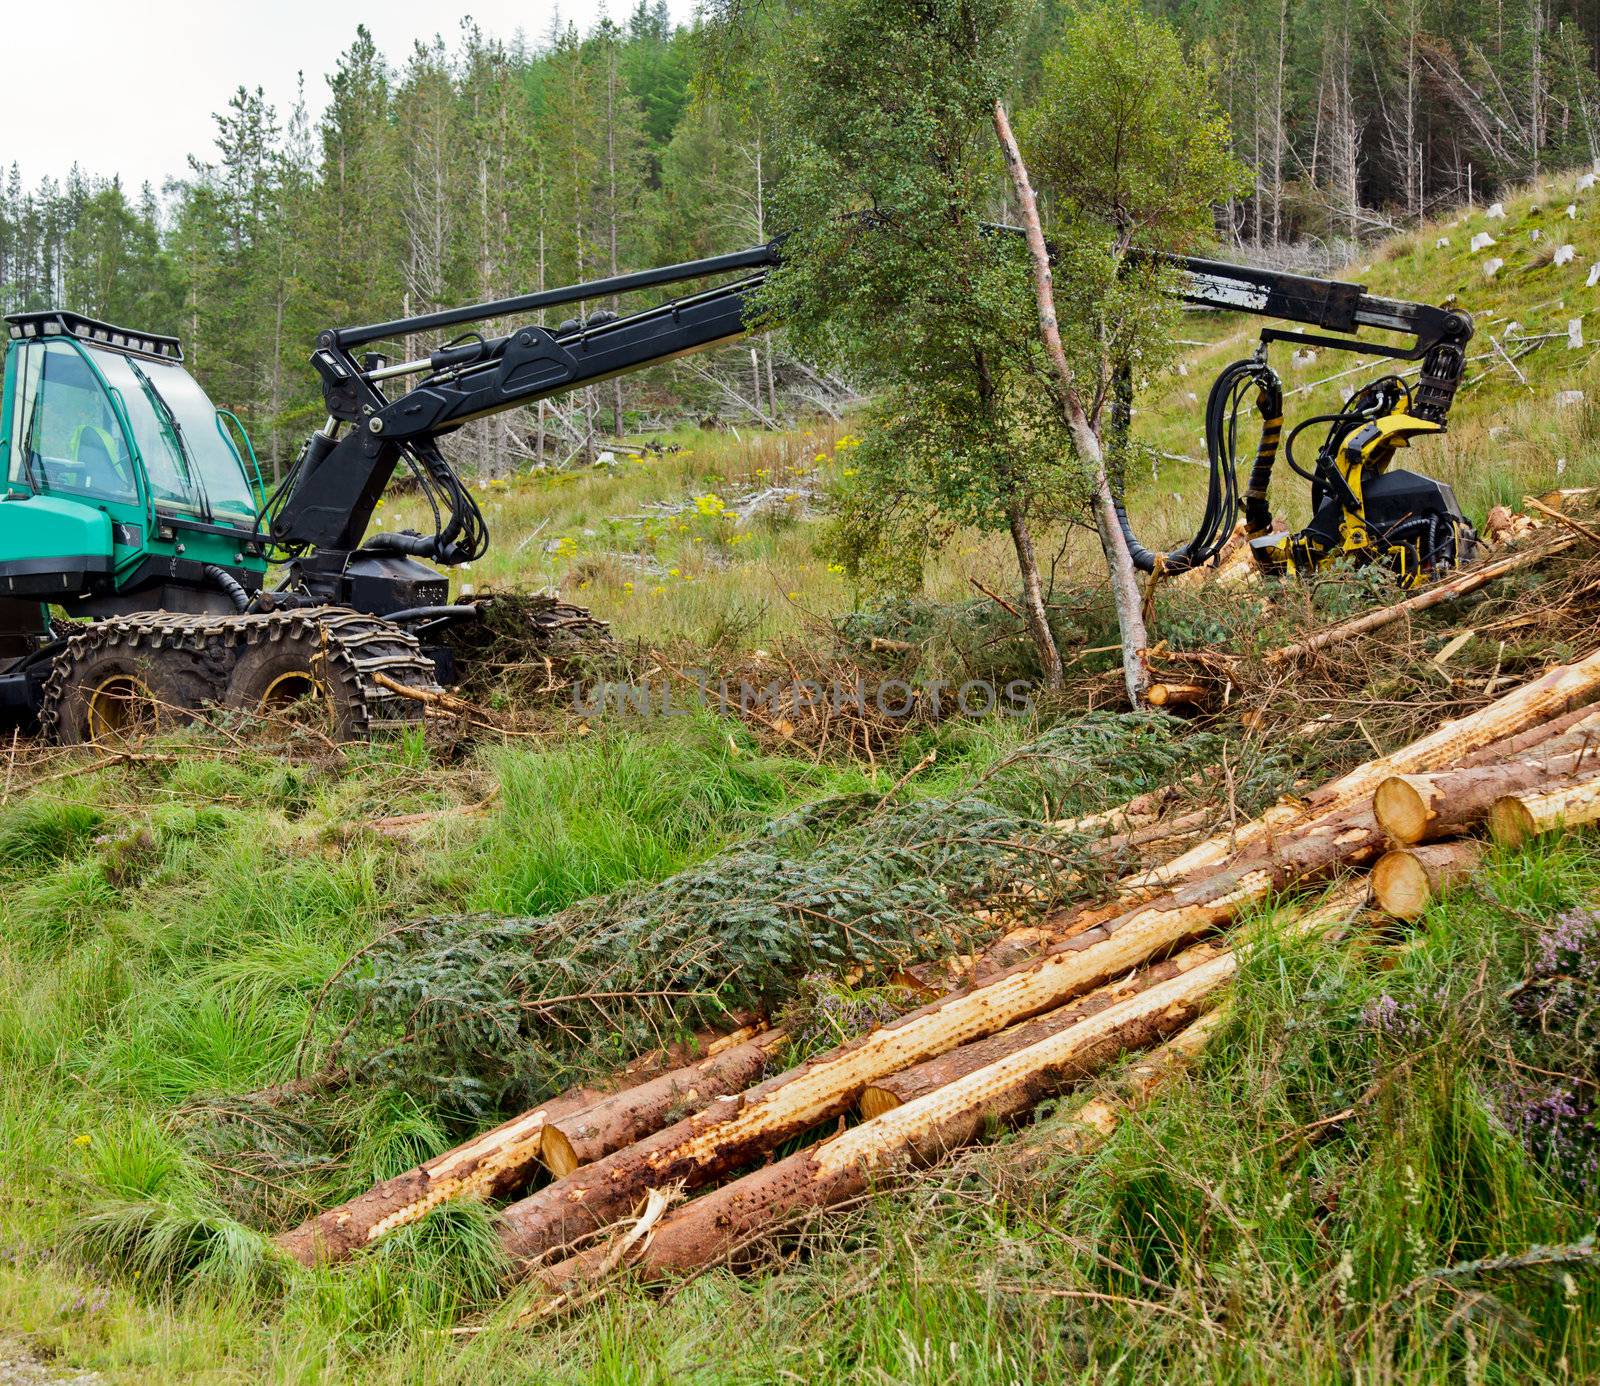 Heavy forestry vehicle harvester employed in cut-to-length logging operations